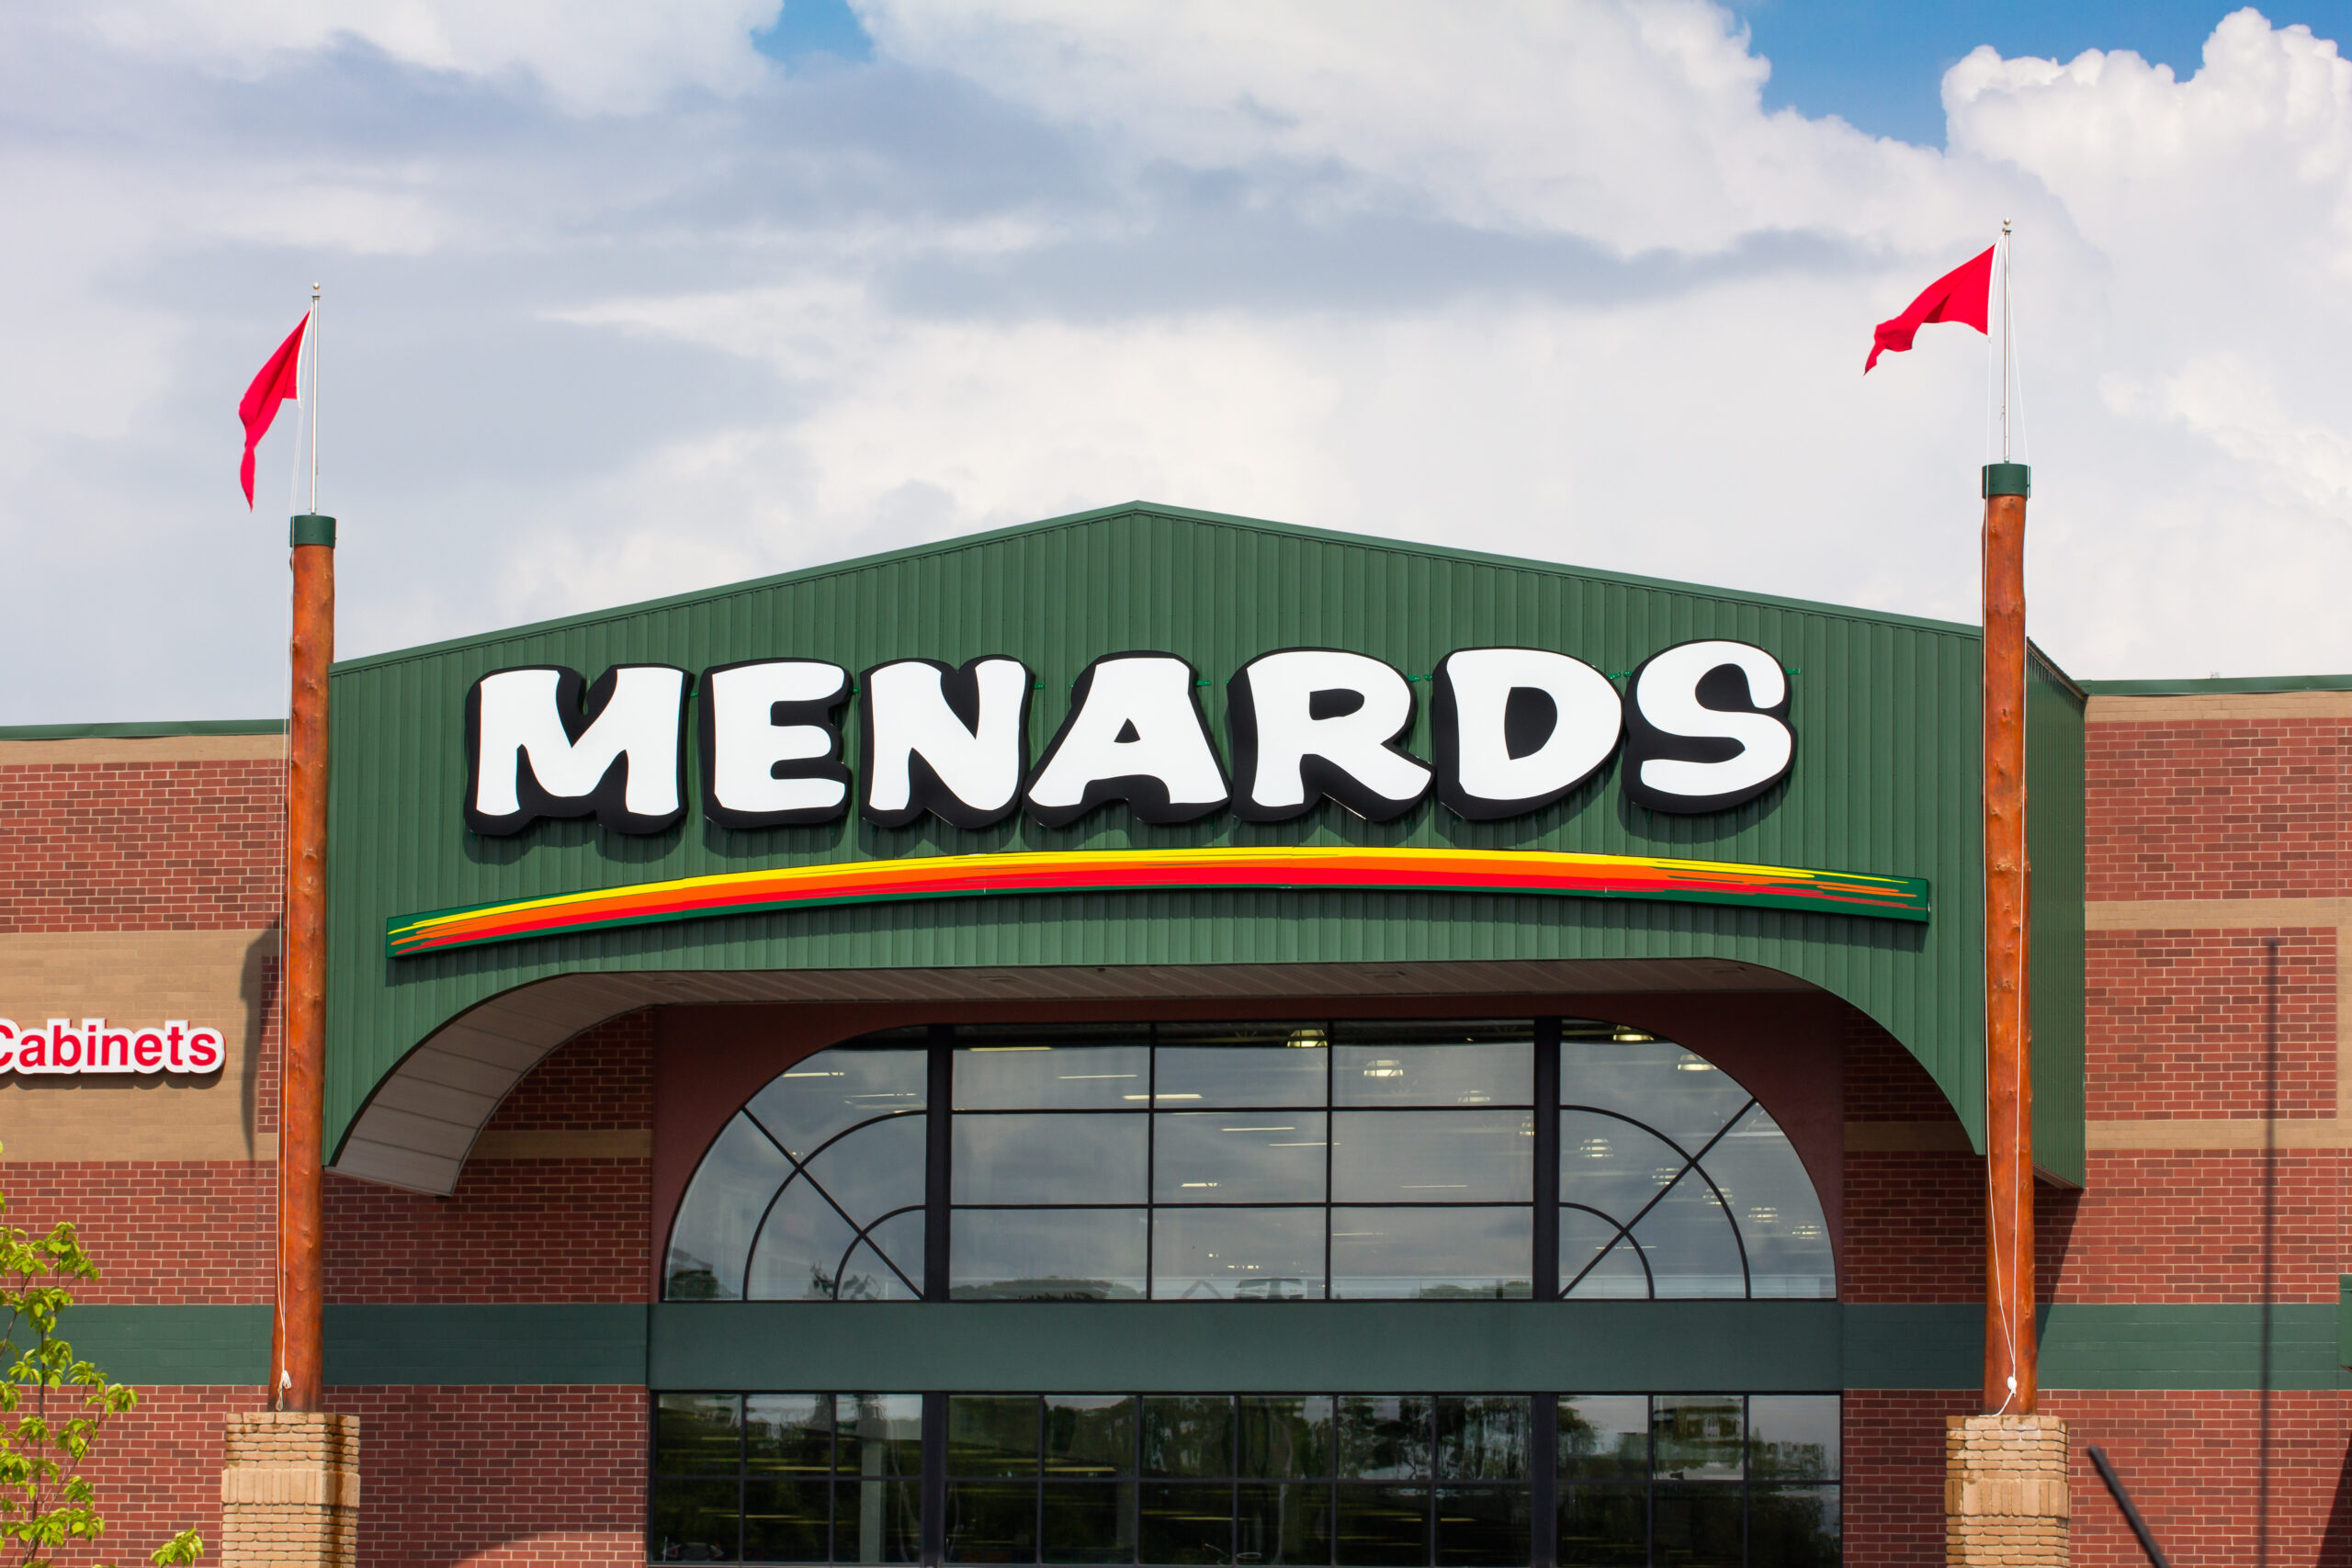 When Is Menards' "11" Sale? Menards 11 Rebate Dates Listed First